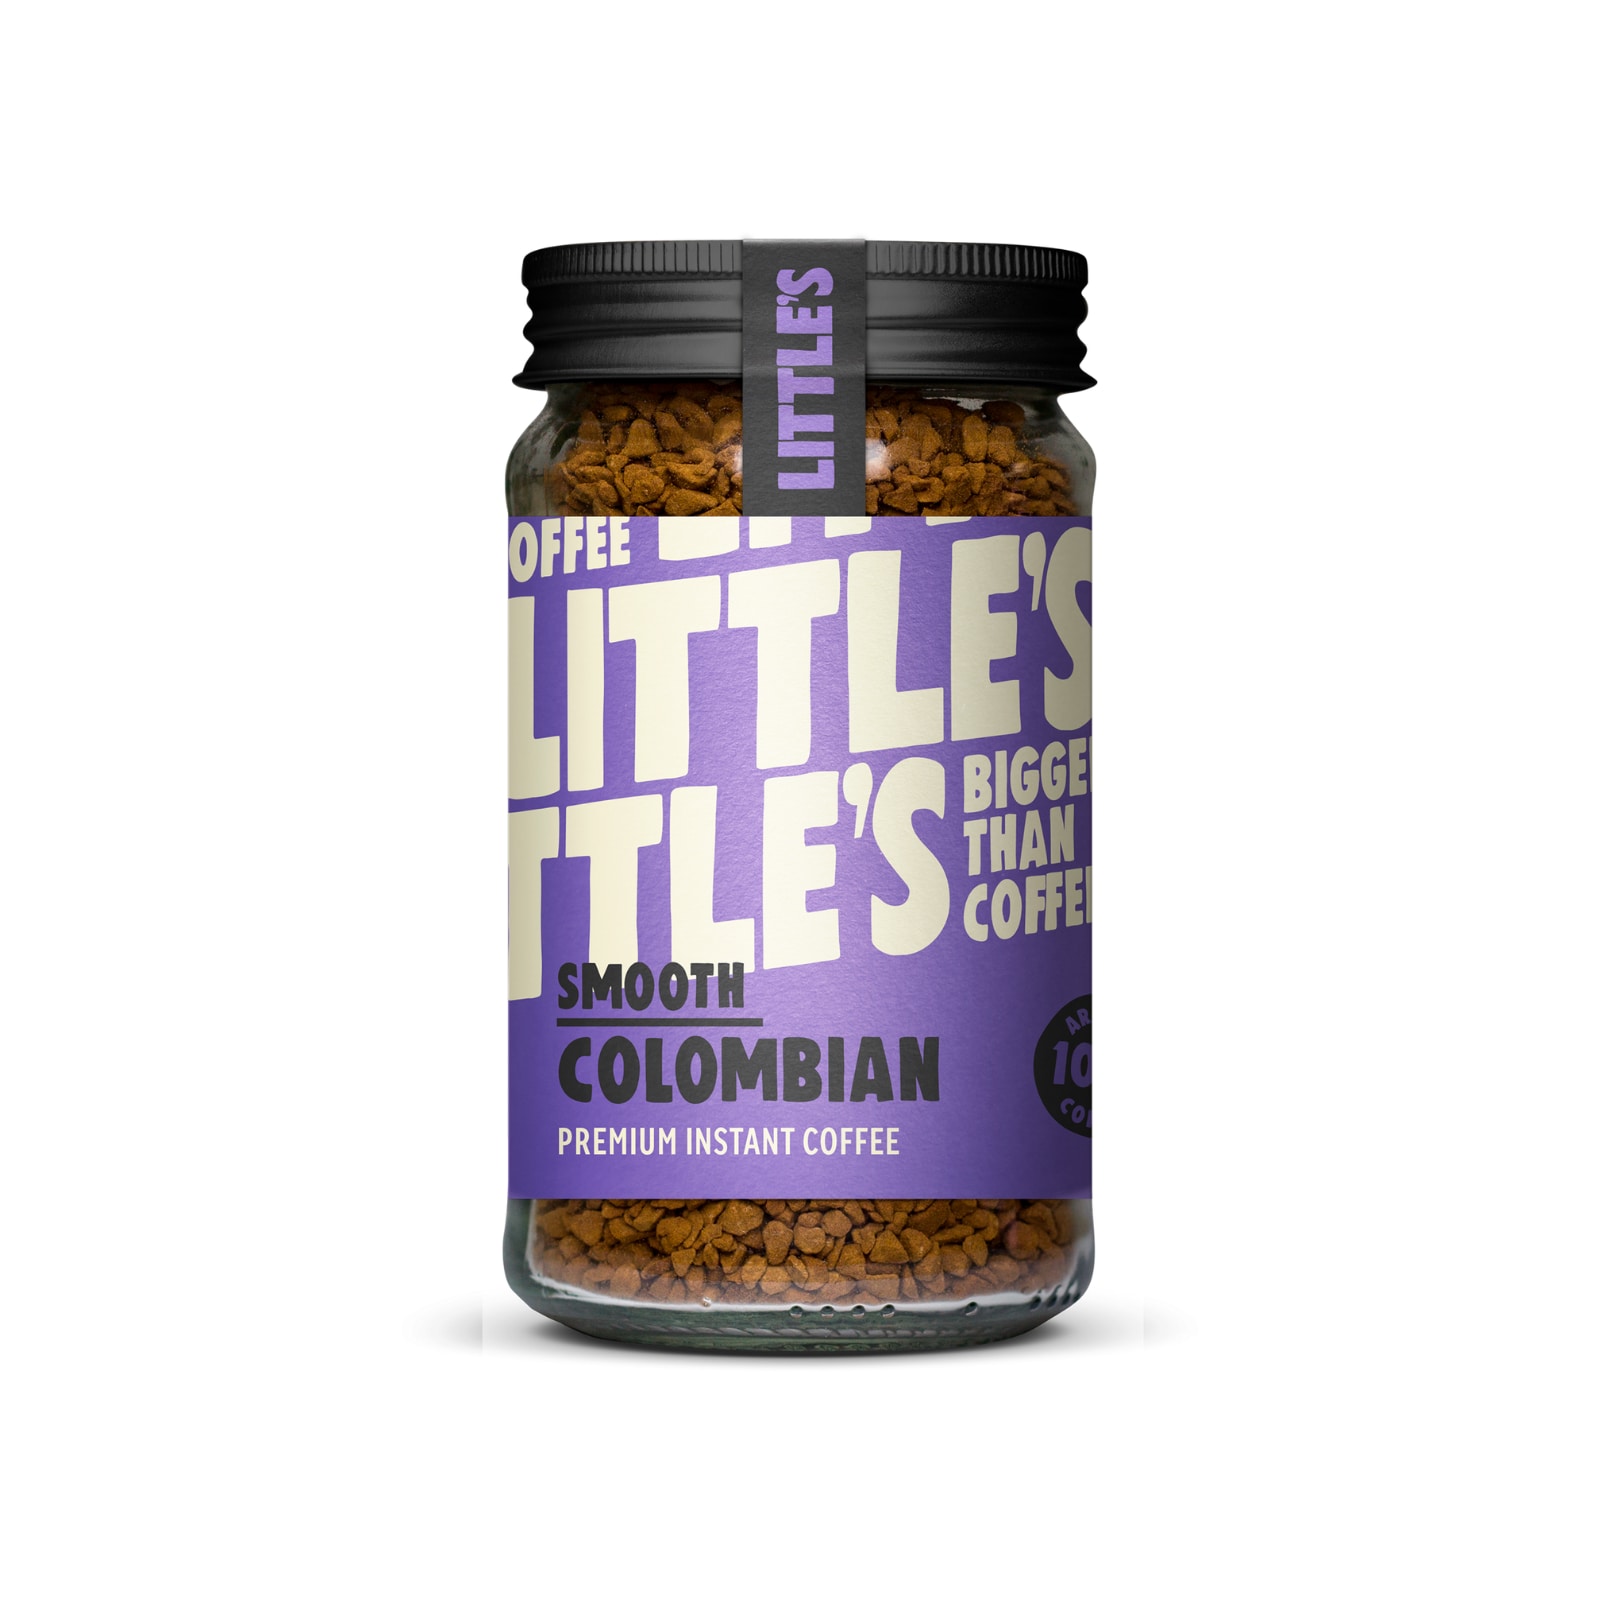 Little's Smooth Colombian Instant Coffee